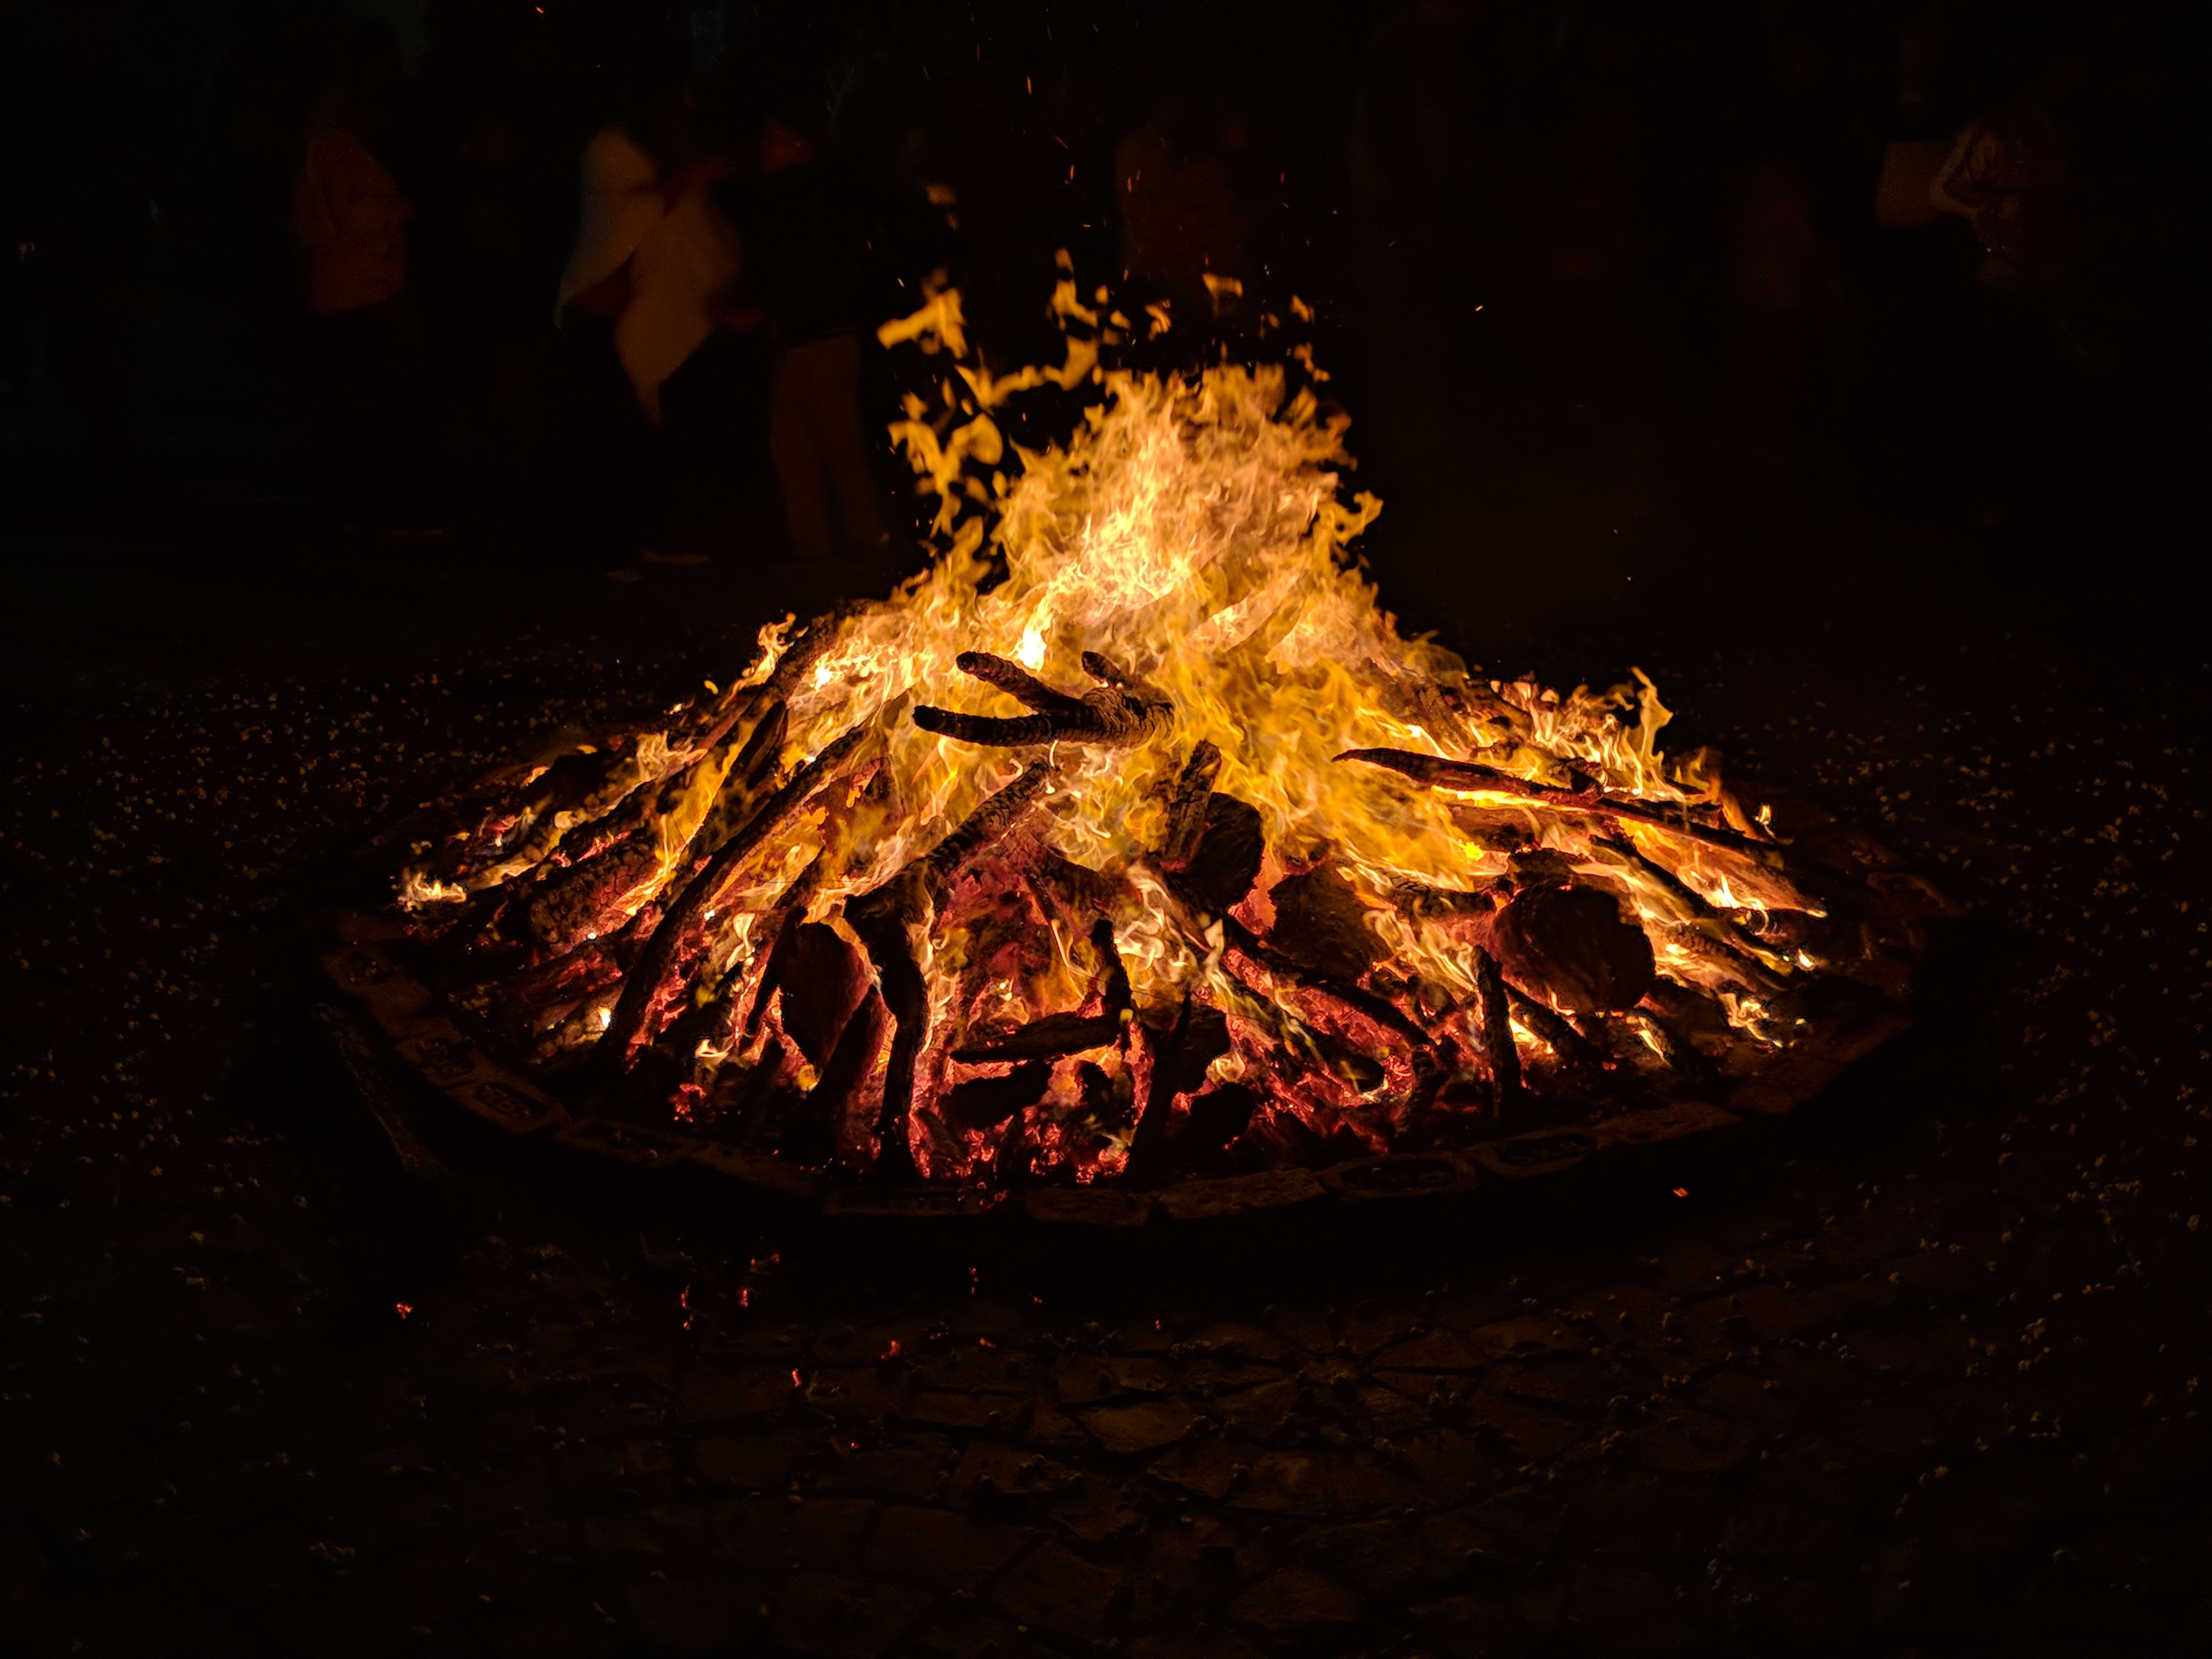 A bonfire at night time. The background is entirely black, and the bonfire is burning orange and yellow.